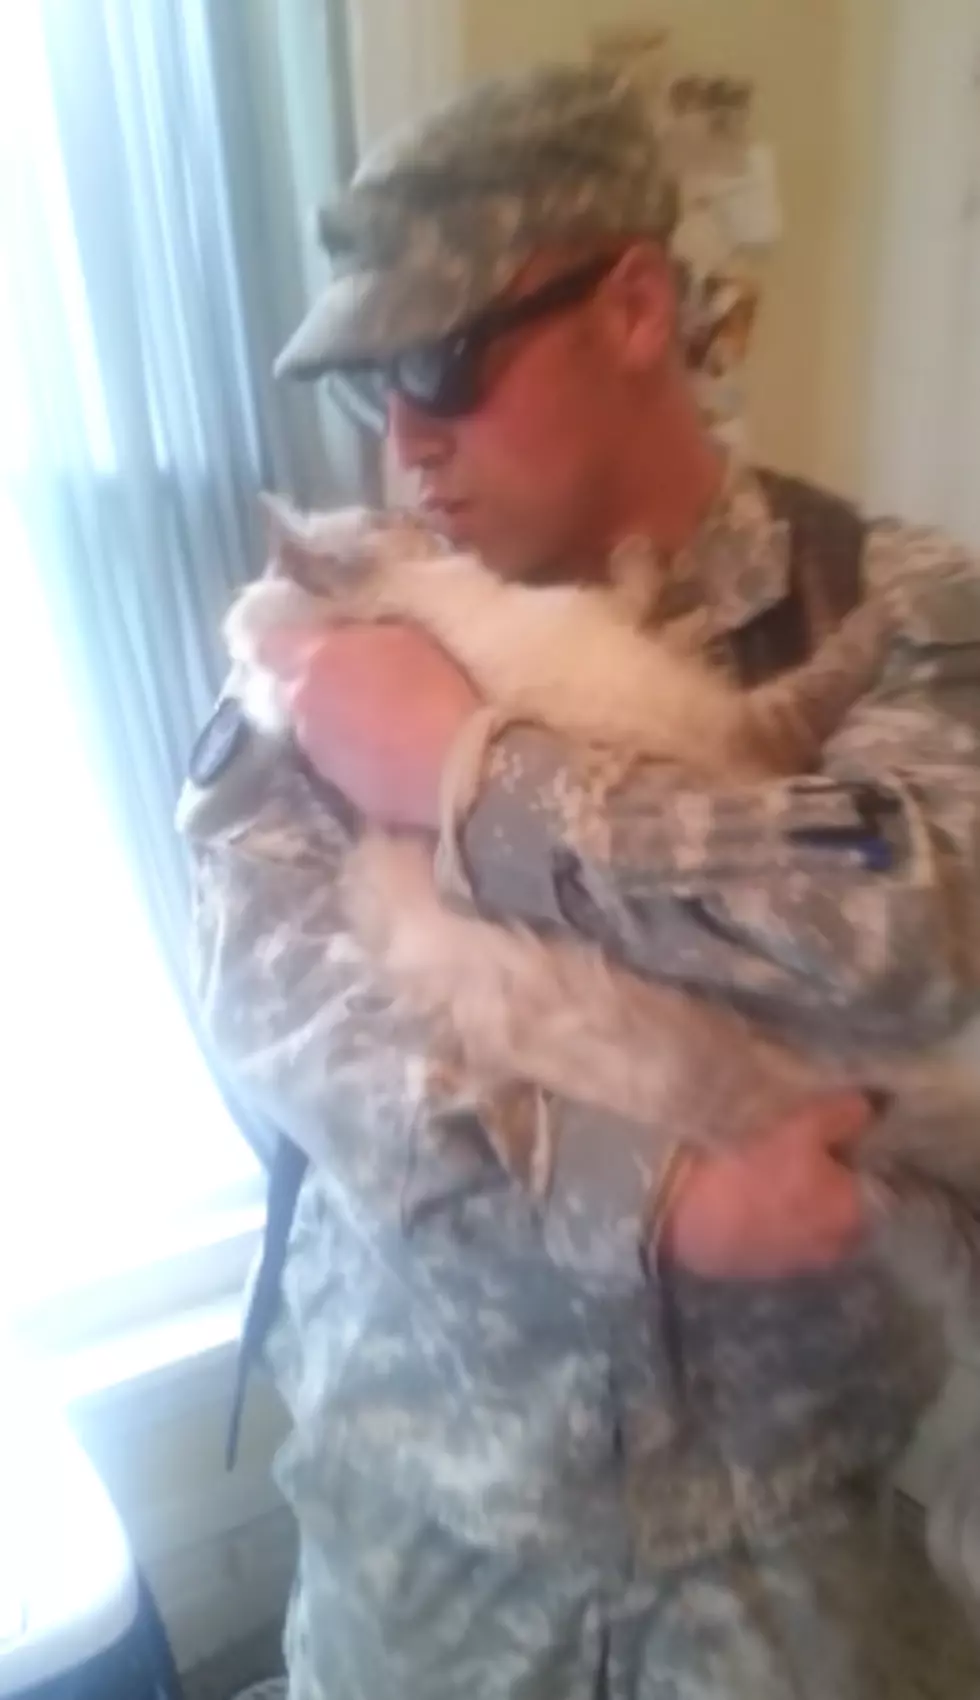 Excited Cat Welcomes Home Soldier (VIDEO)